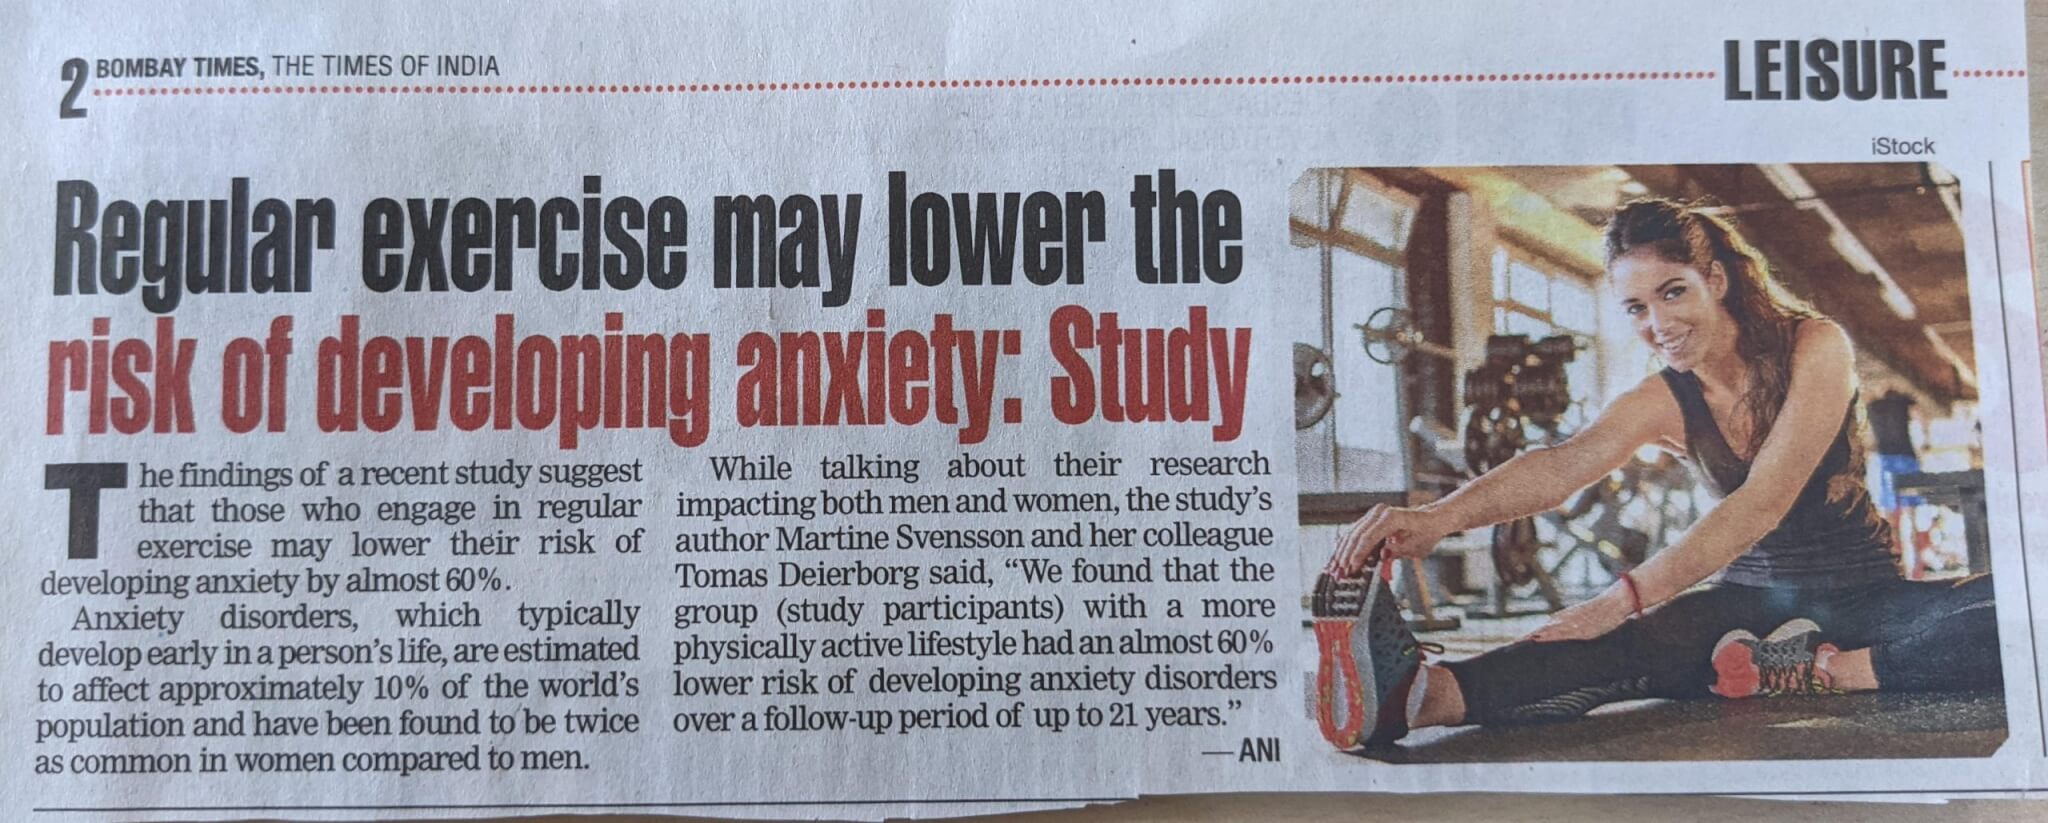 Regular Exercise may lower the risk of developing anxiety